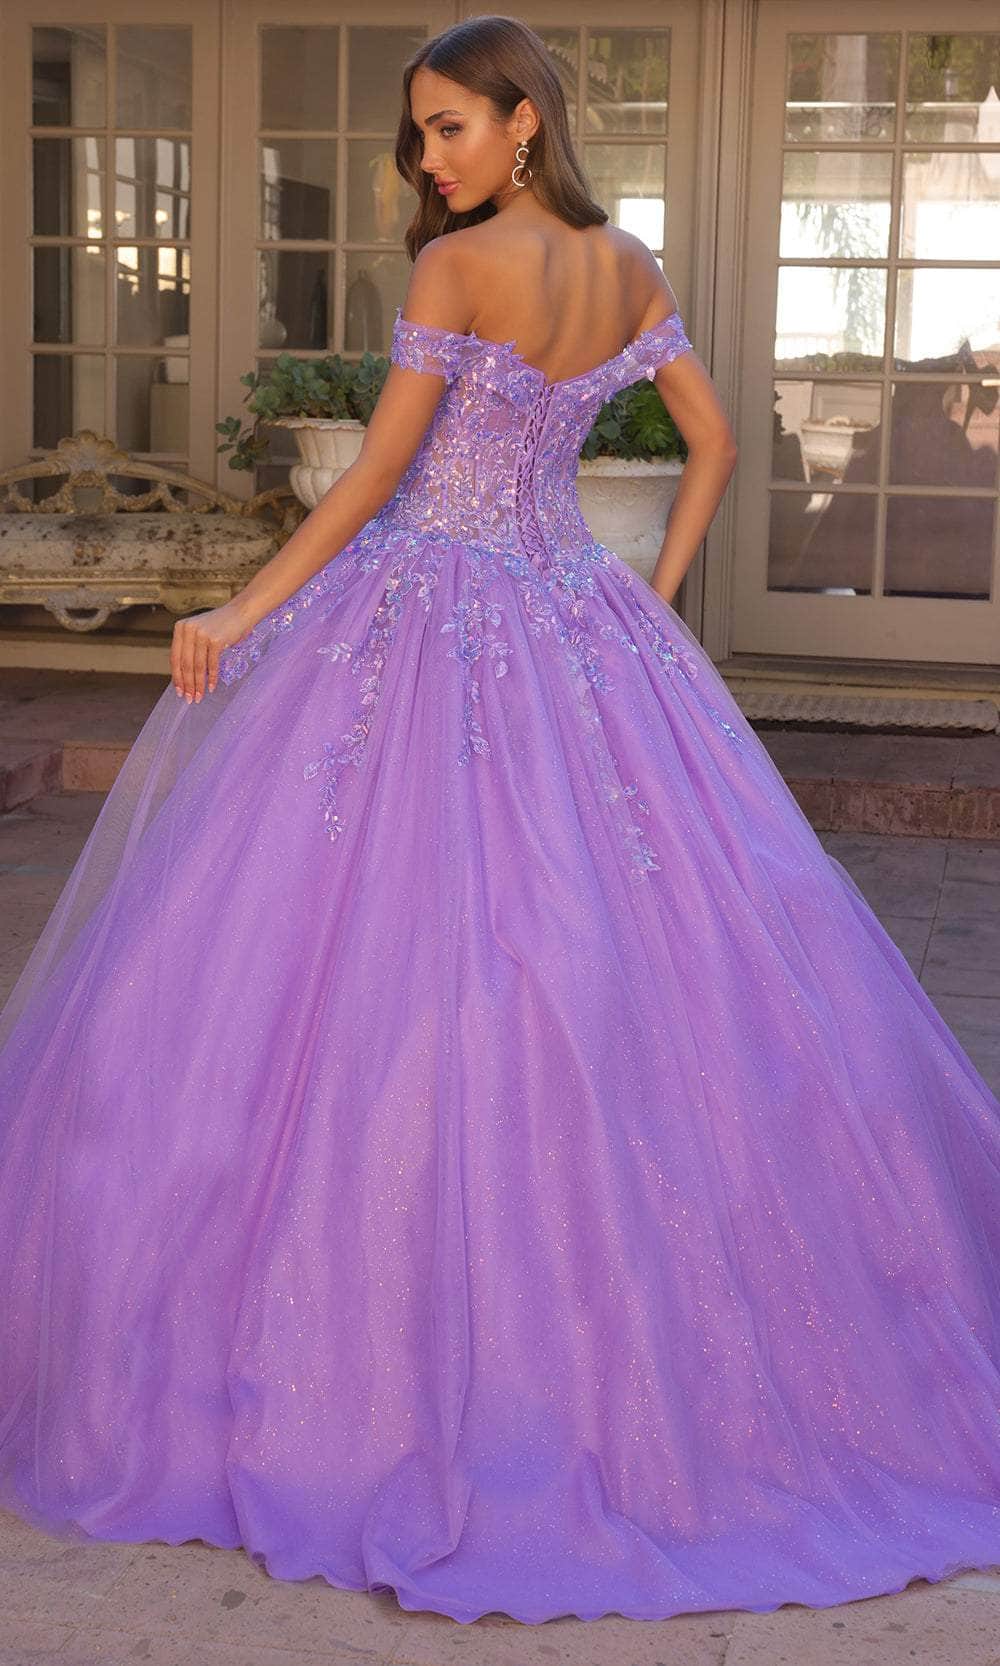 Nox Anabel H1349 - Beaded Corset Bodice Ballgown Ball Gowns 